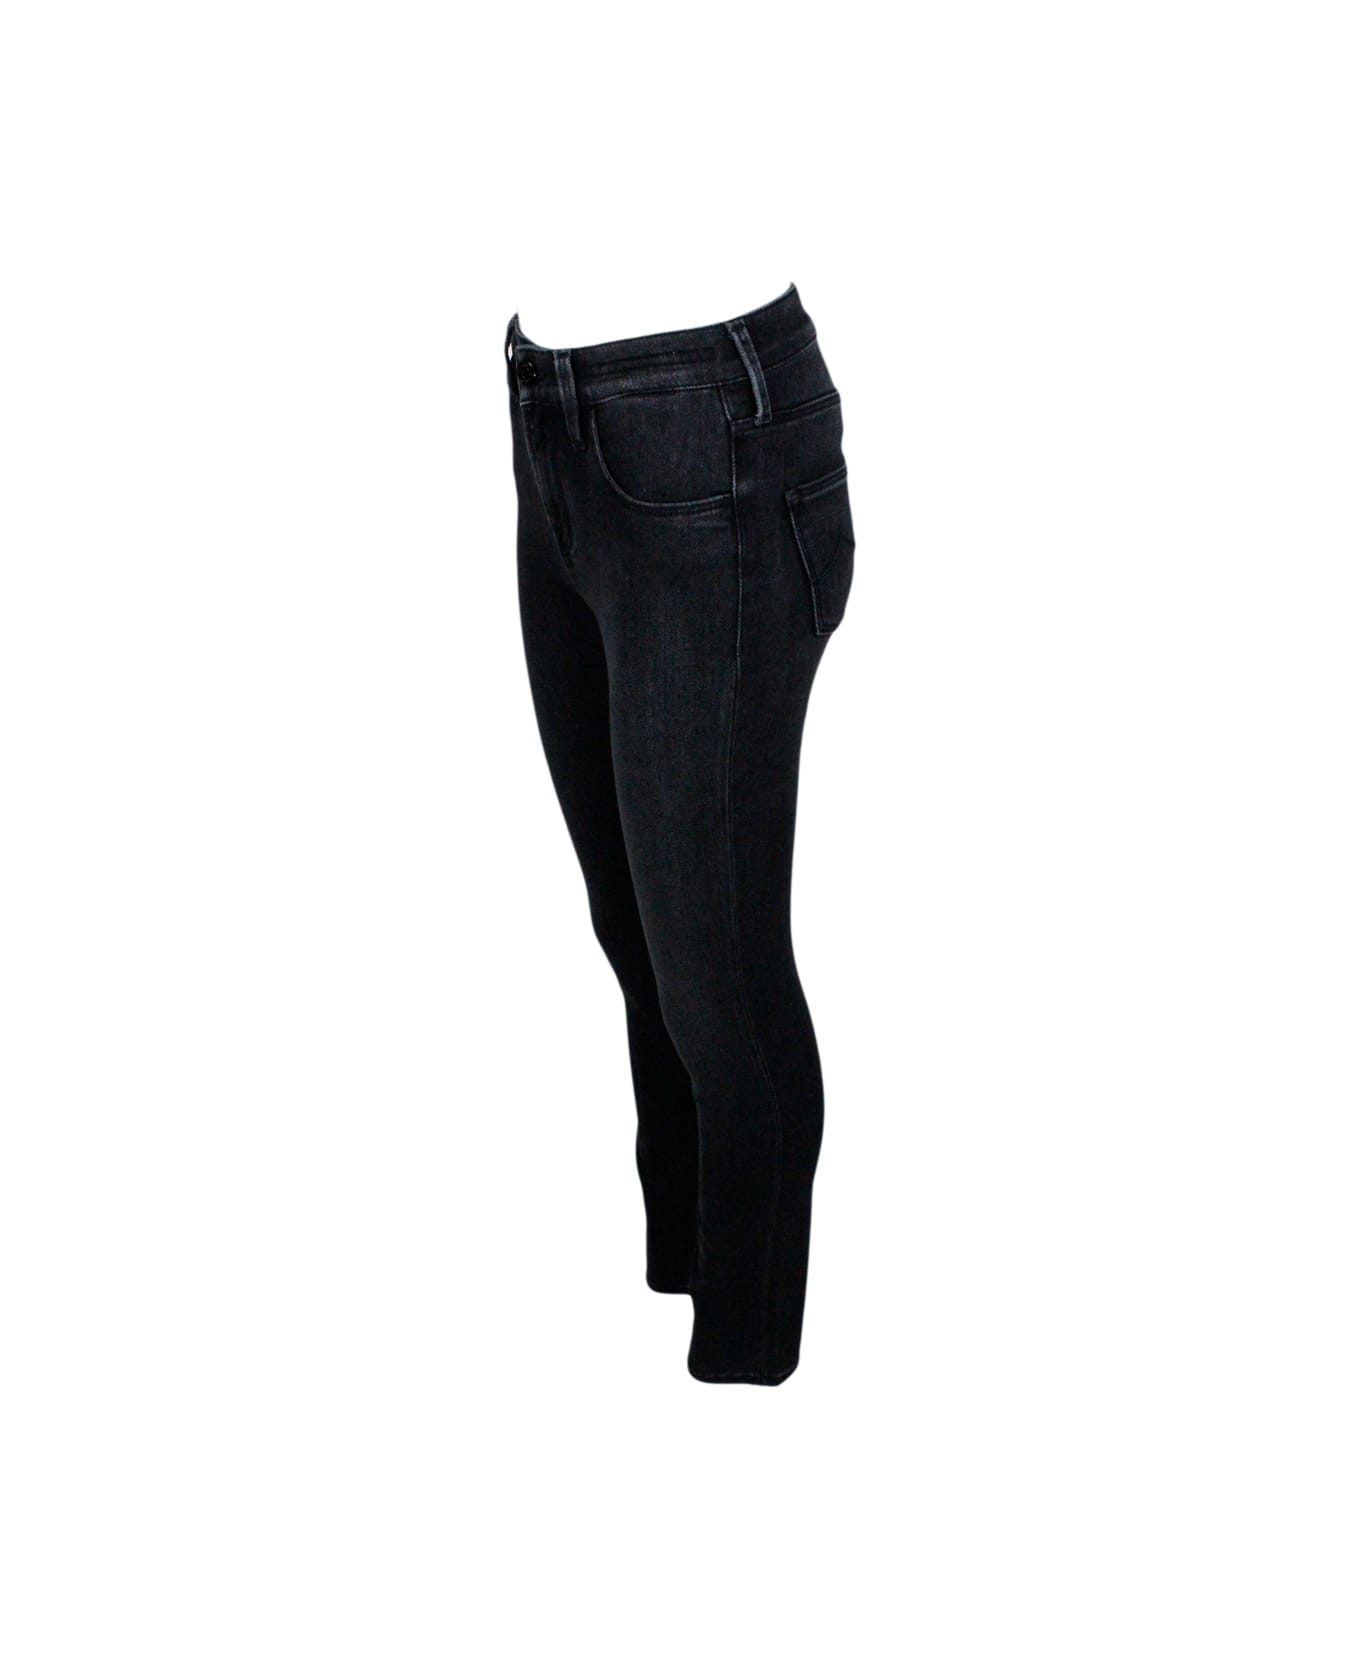 Jacob Cohen Kimberly Skinny Fit Jeans In Super Stretch Denim - Black ボトムス